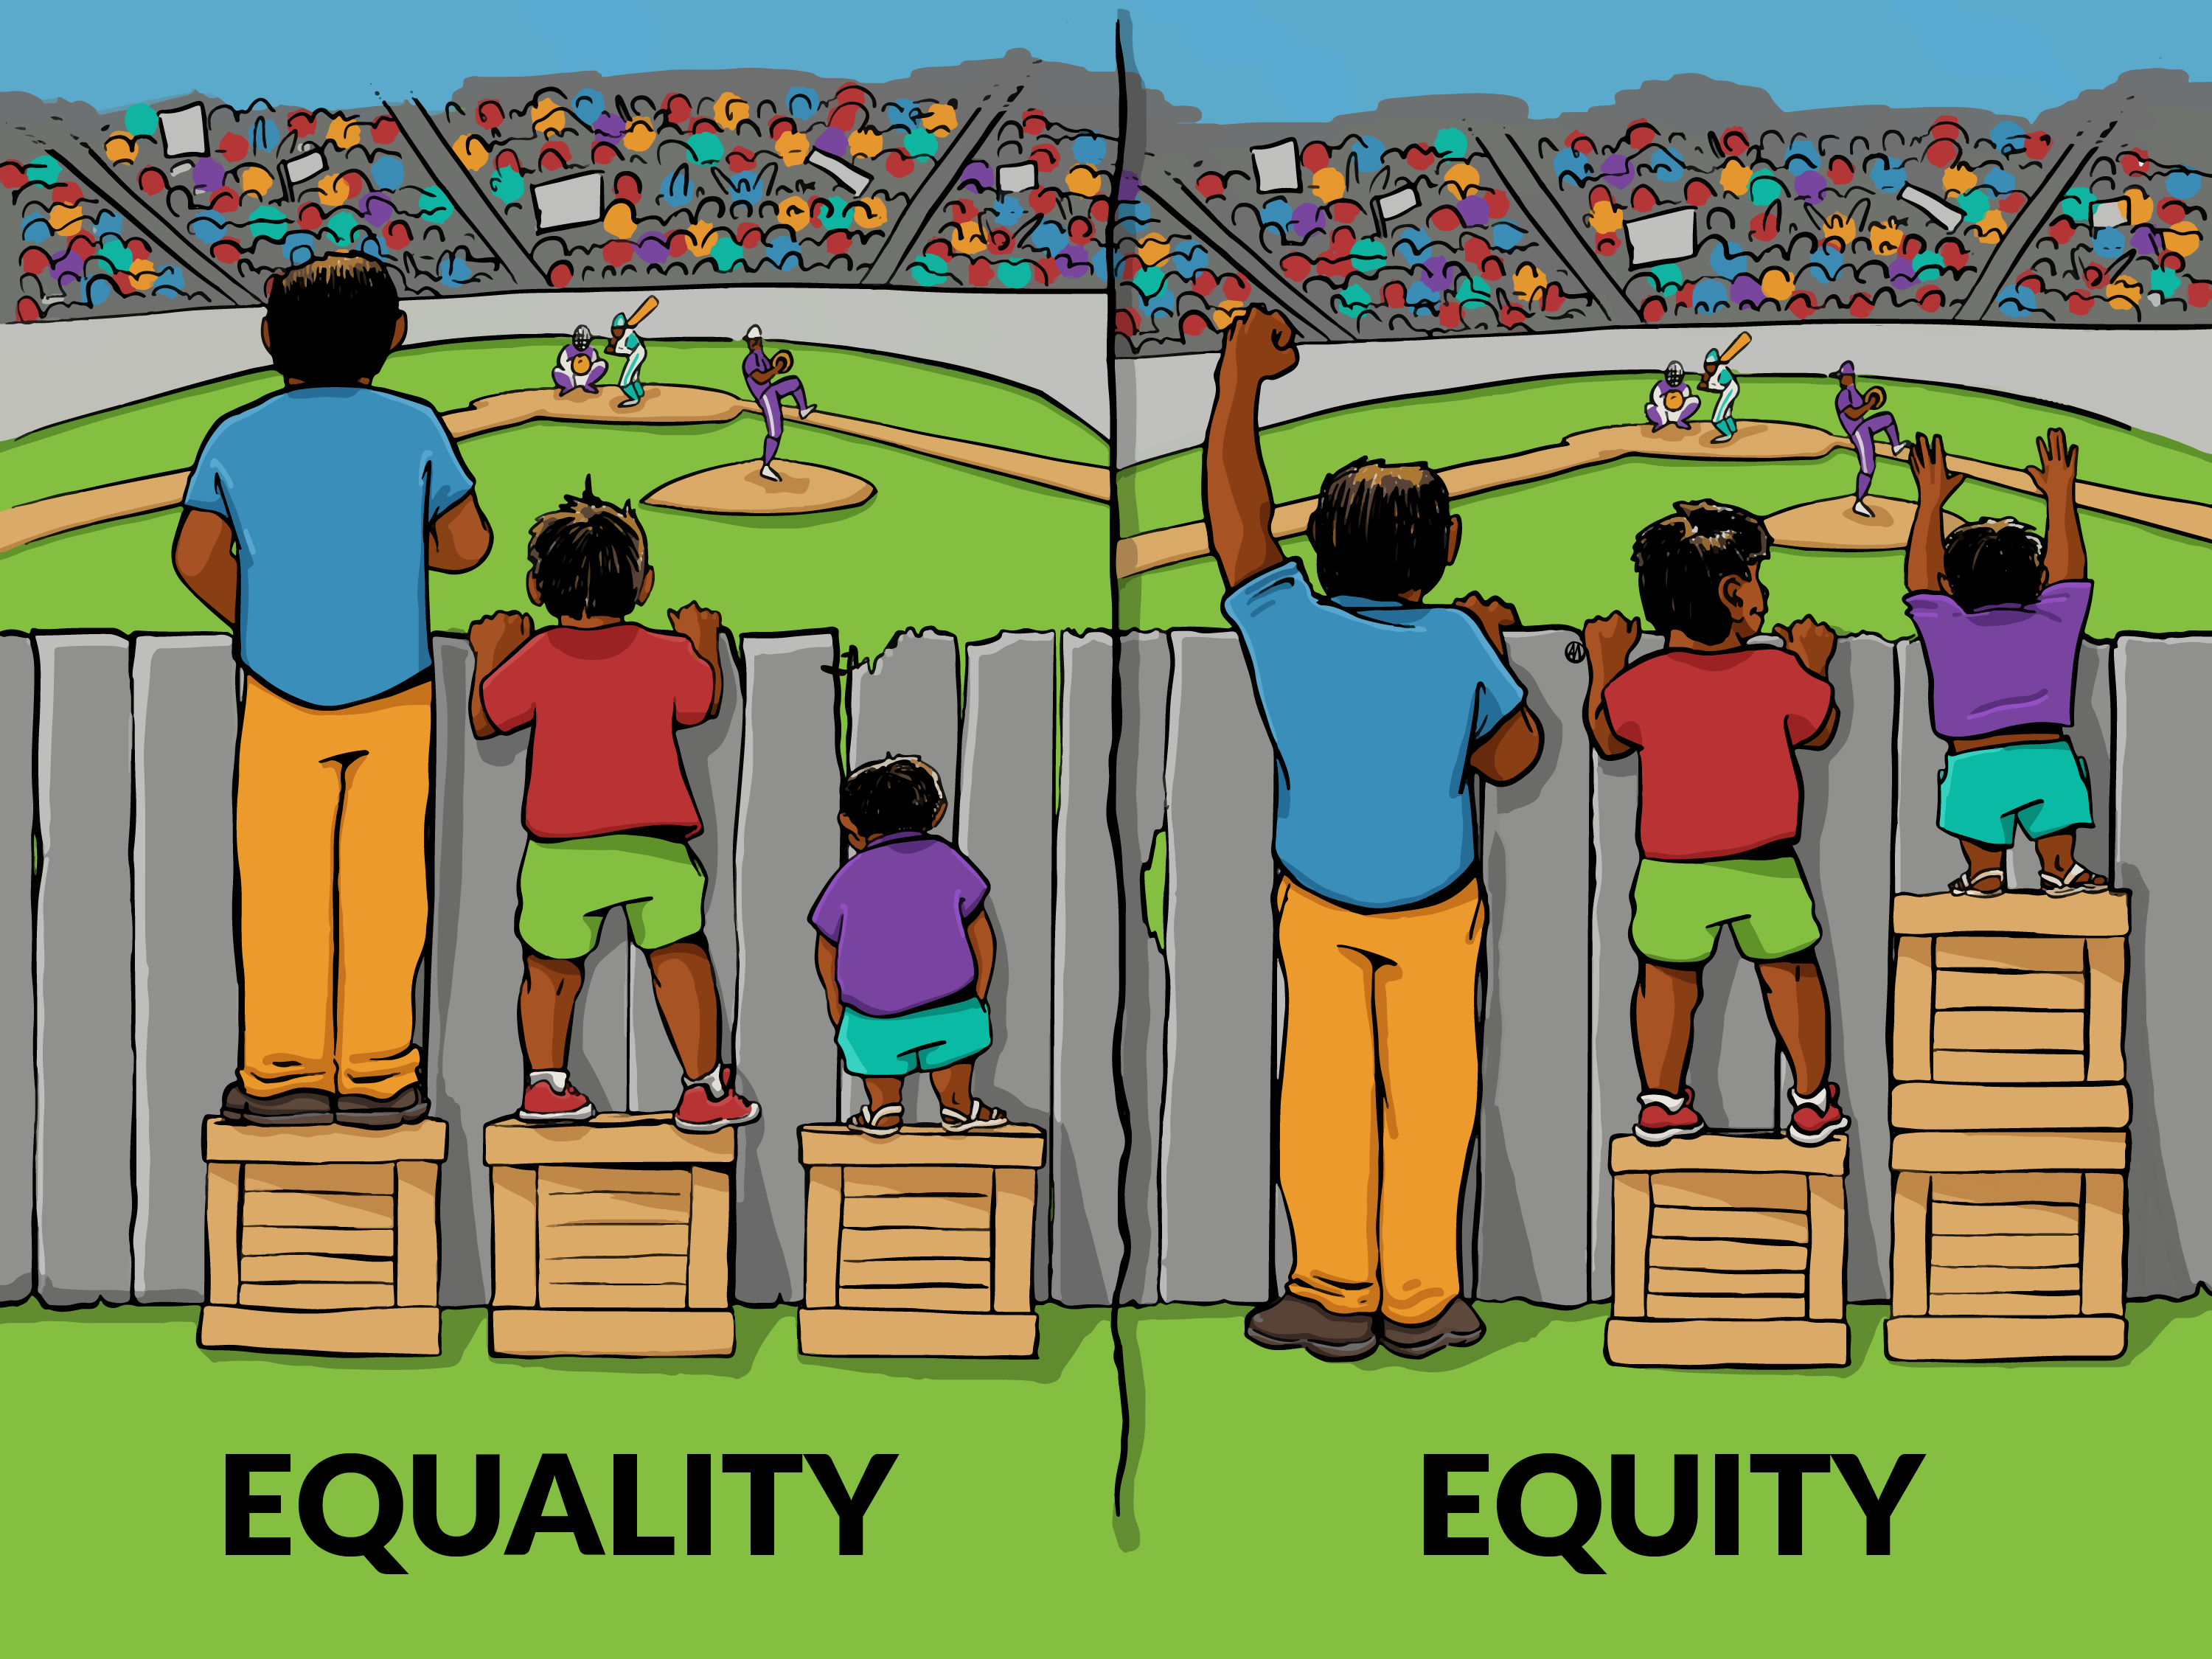 Text demonstrates the difference between equality and equity with equality resulting in unequal views and equity resulting in equal views